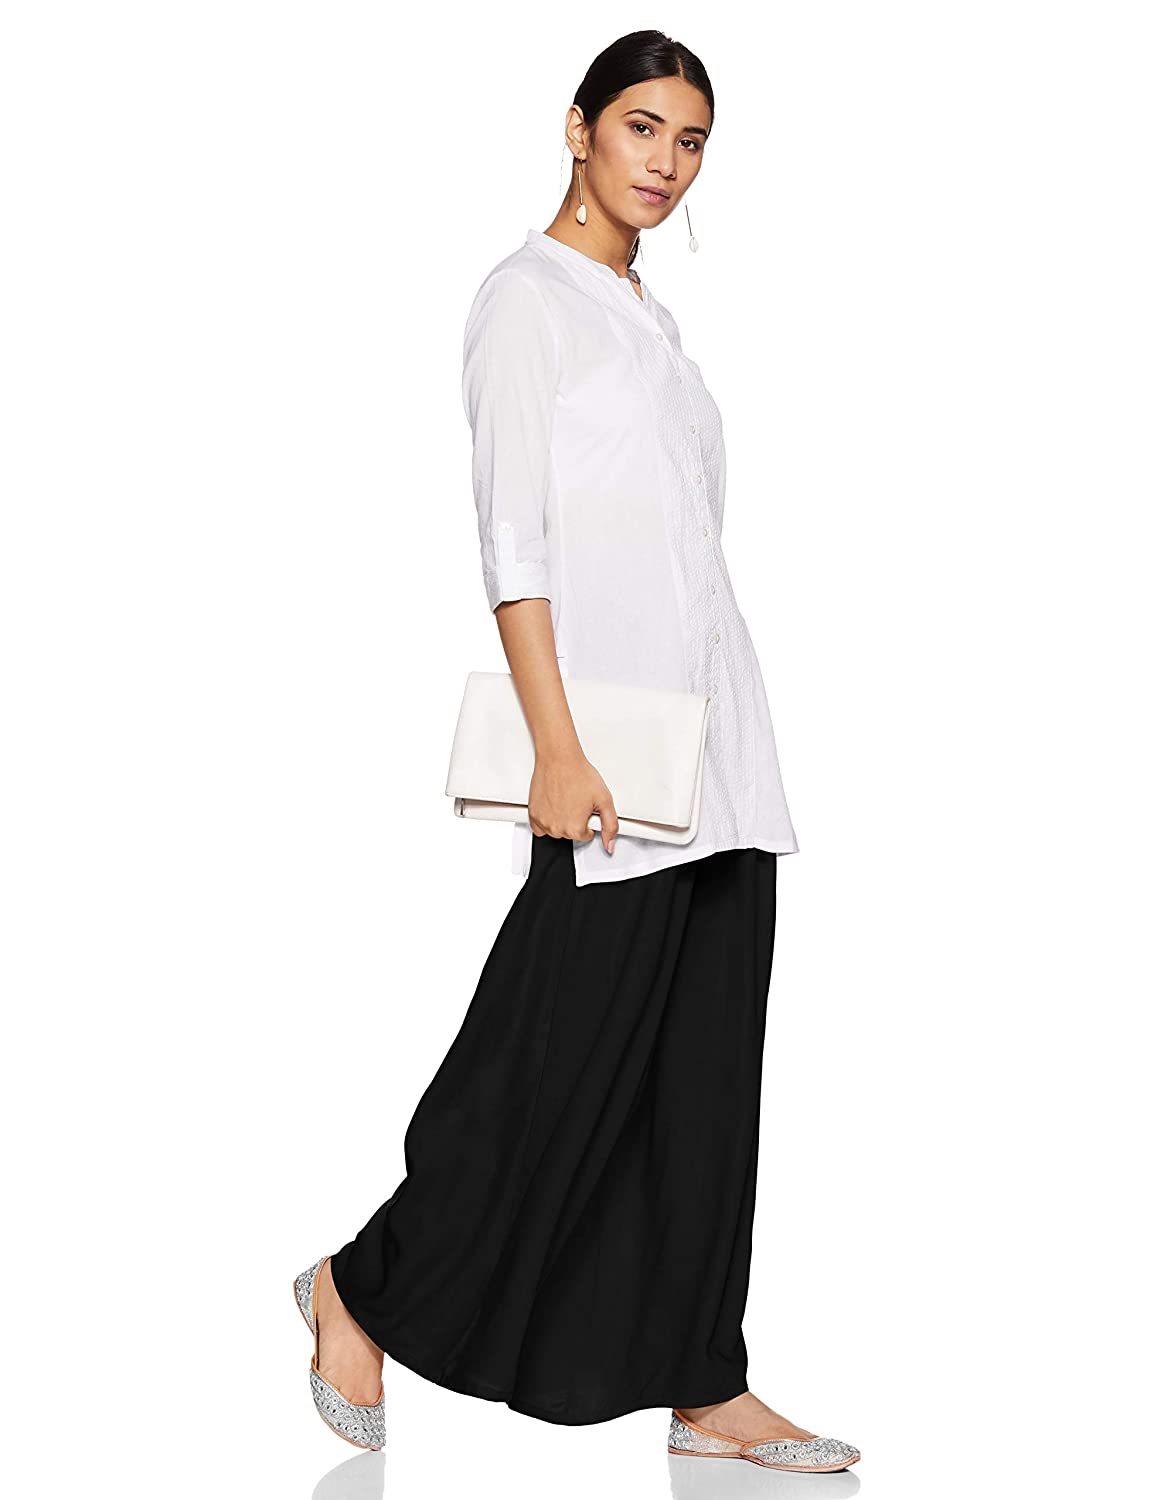 Buy teej New Black and Cream Flared Solid Rayon Palazzo Pants Combo Pack  for Ladies at Amazon.in